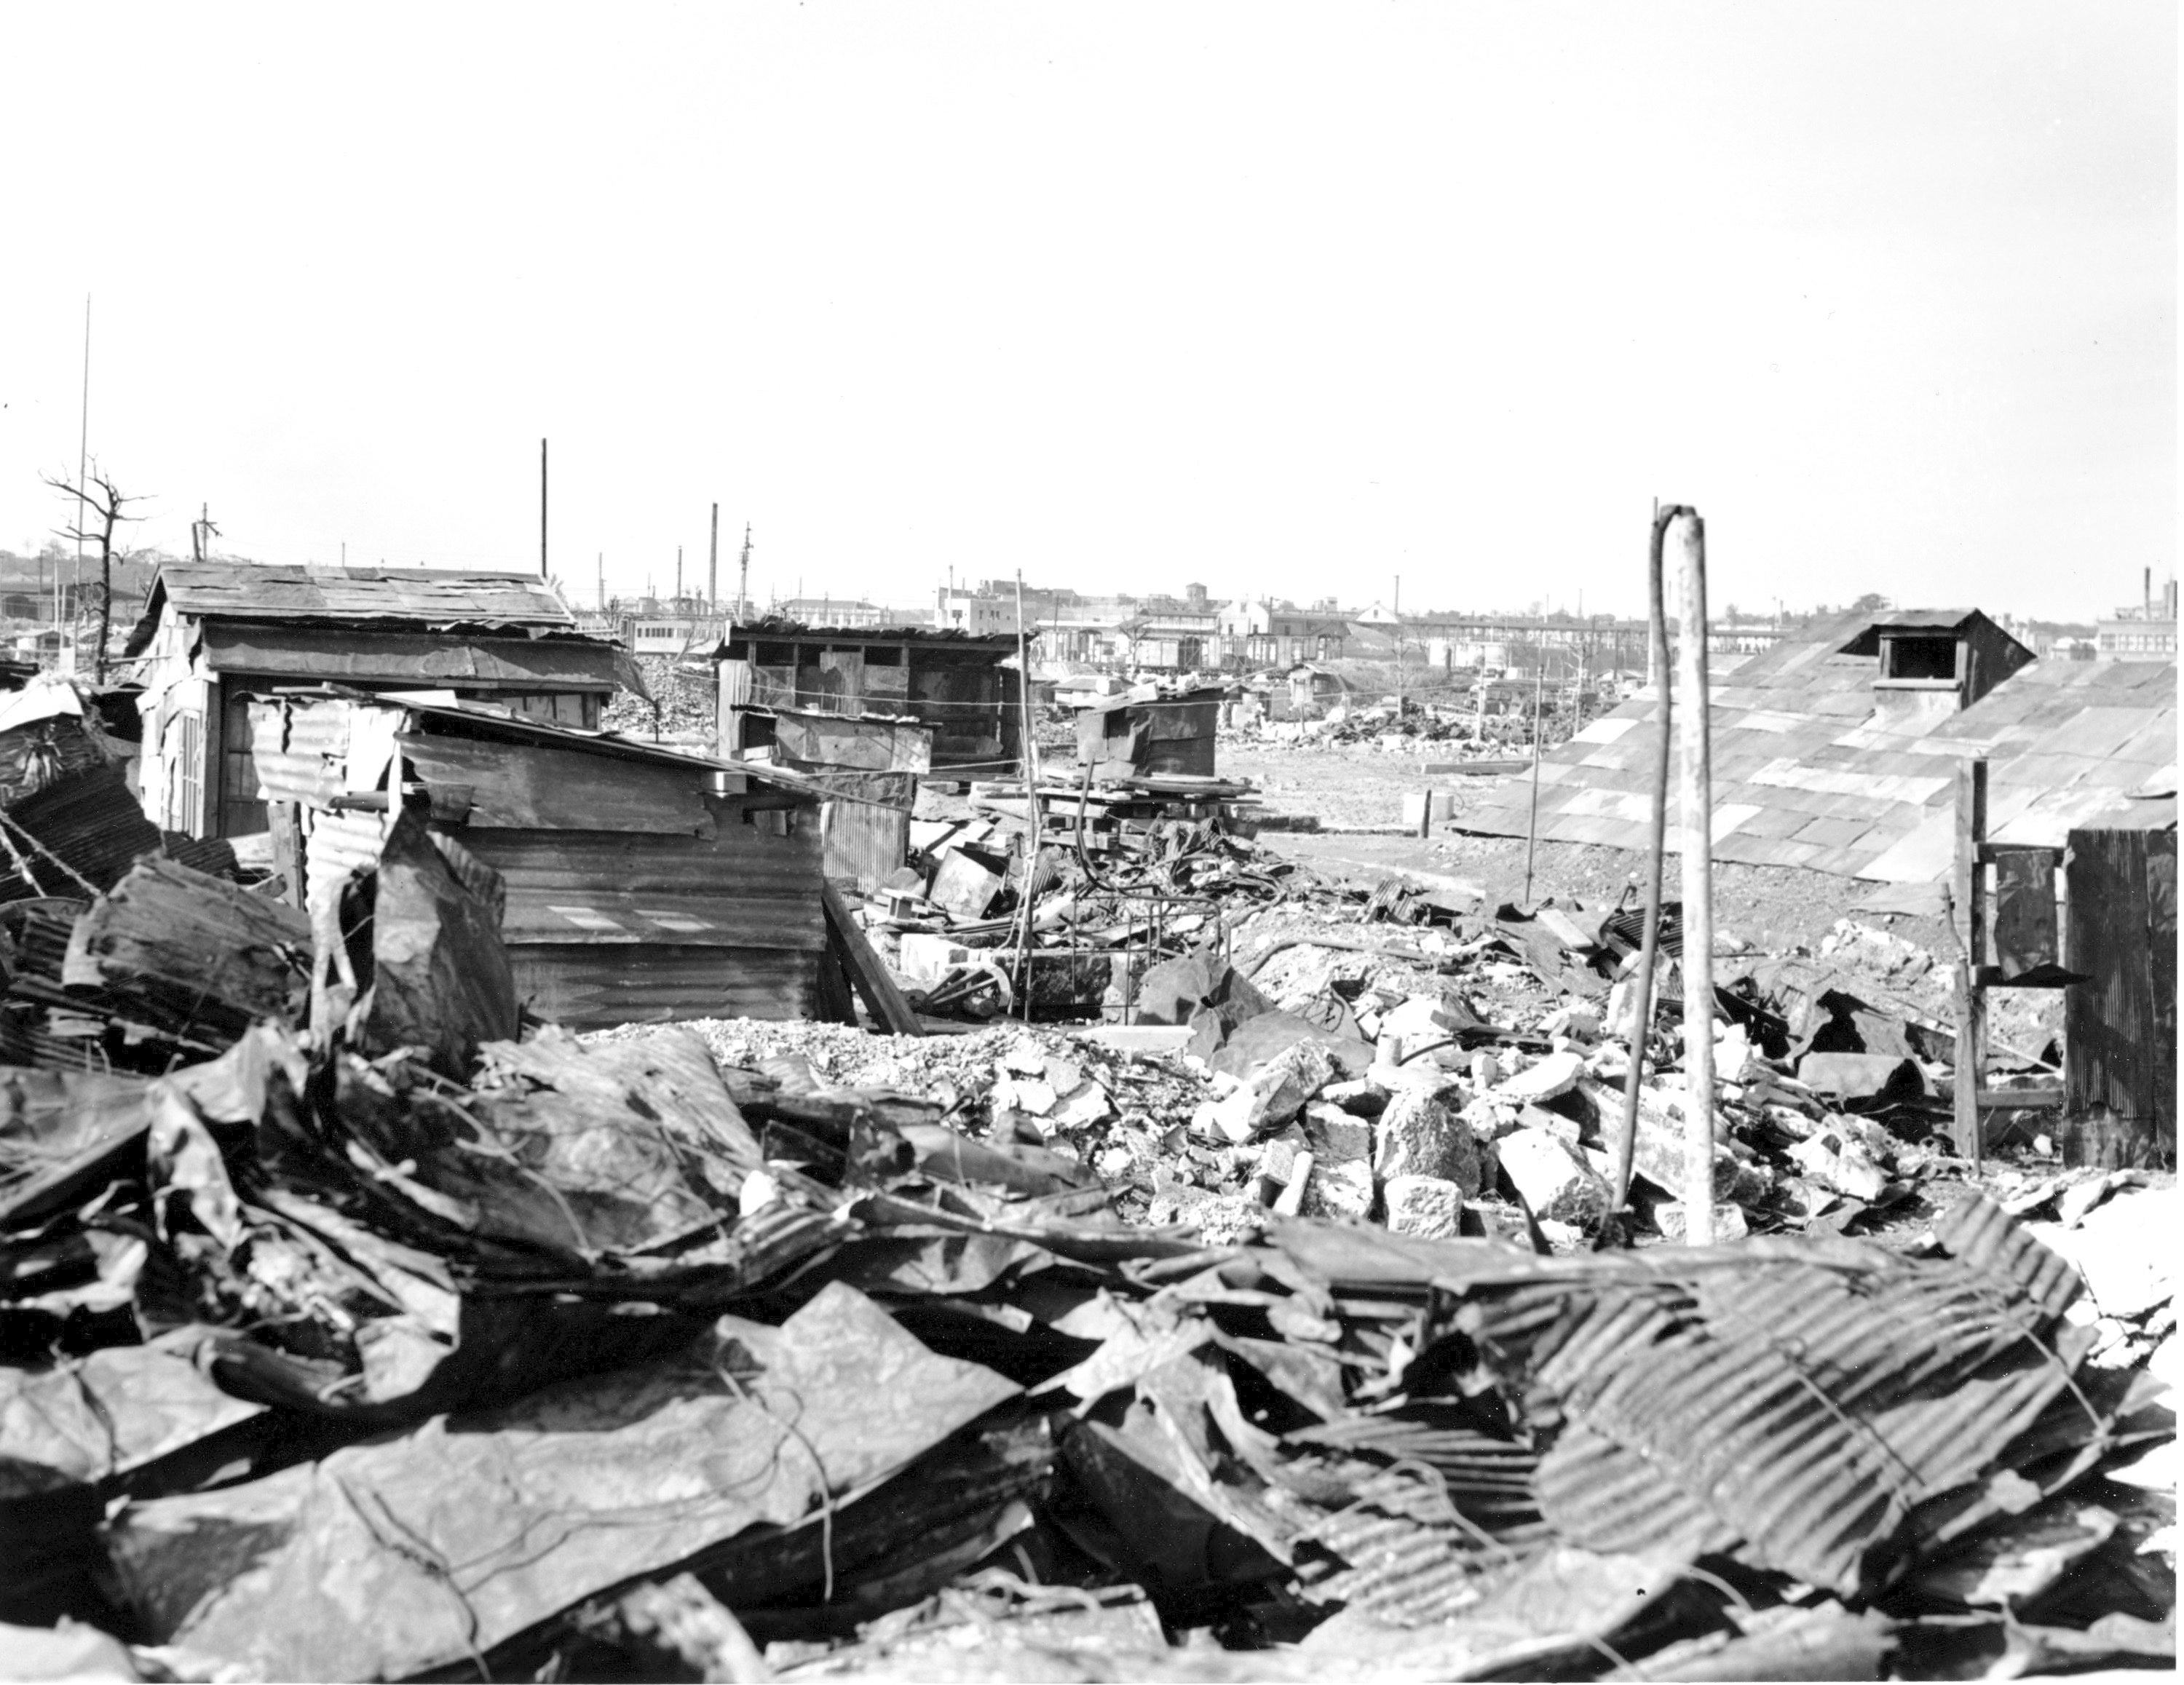 Ruined buildings left behind after the firebombing